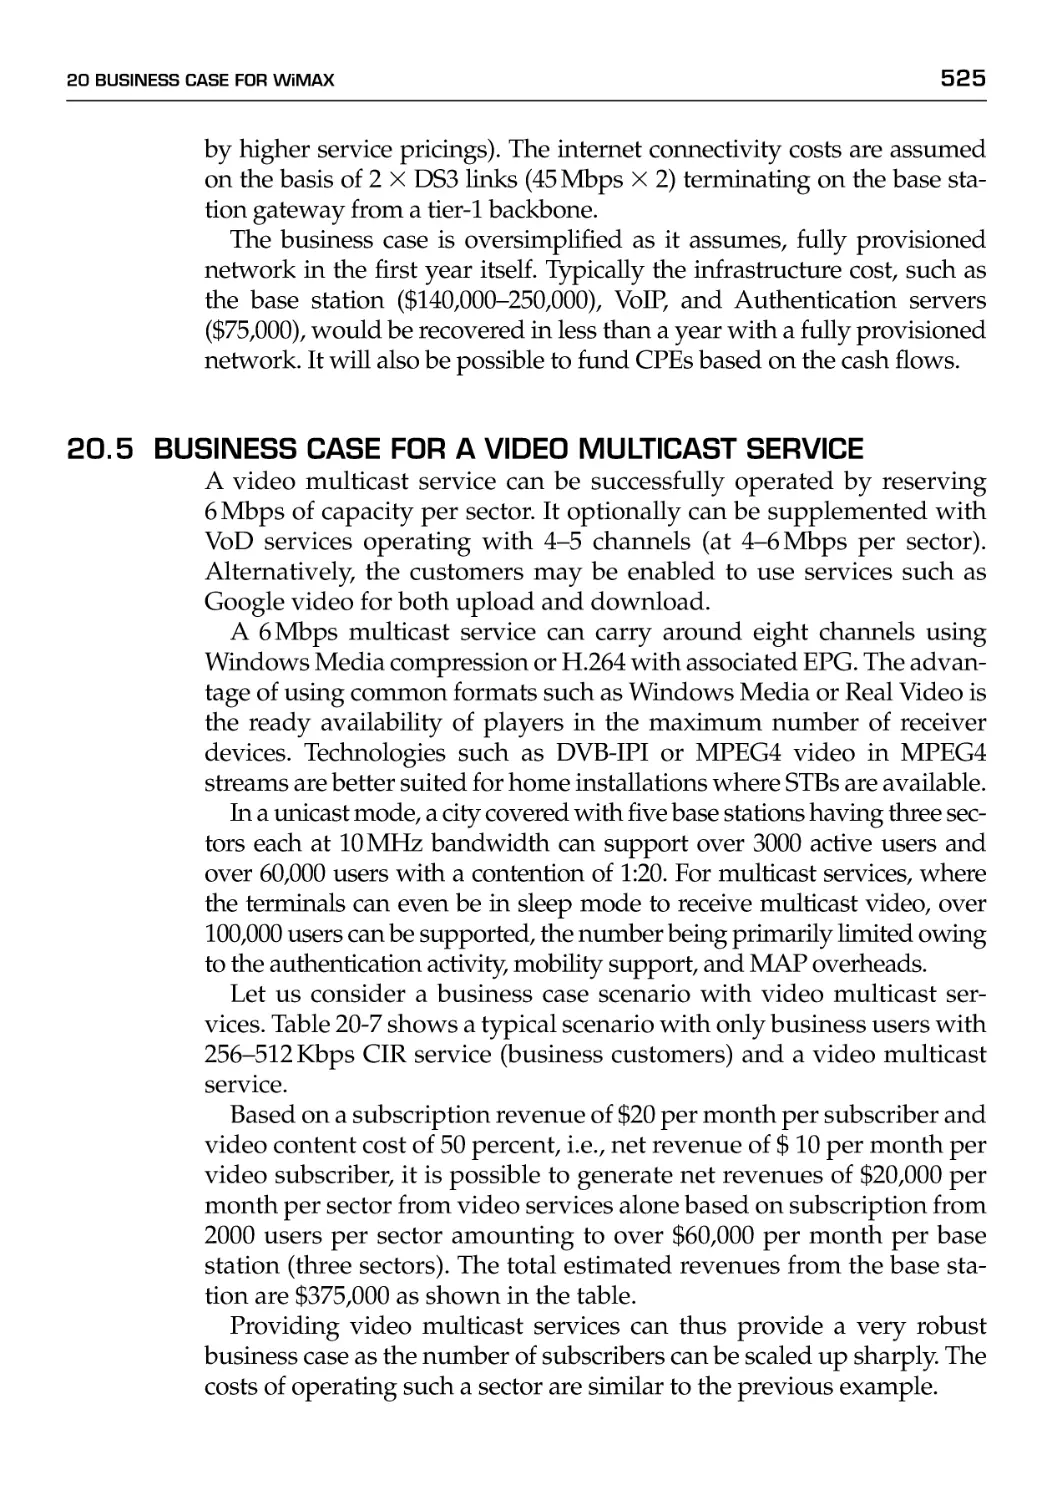 20.5 Business Case for a Video Multicast Service